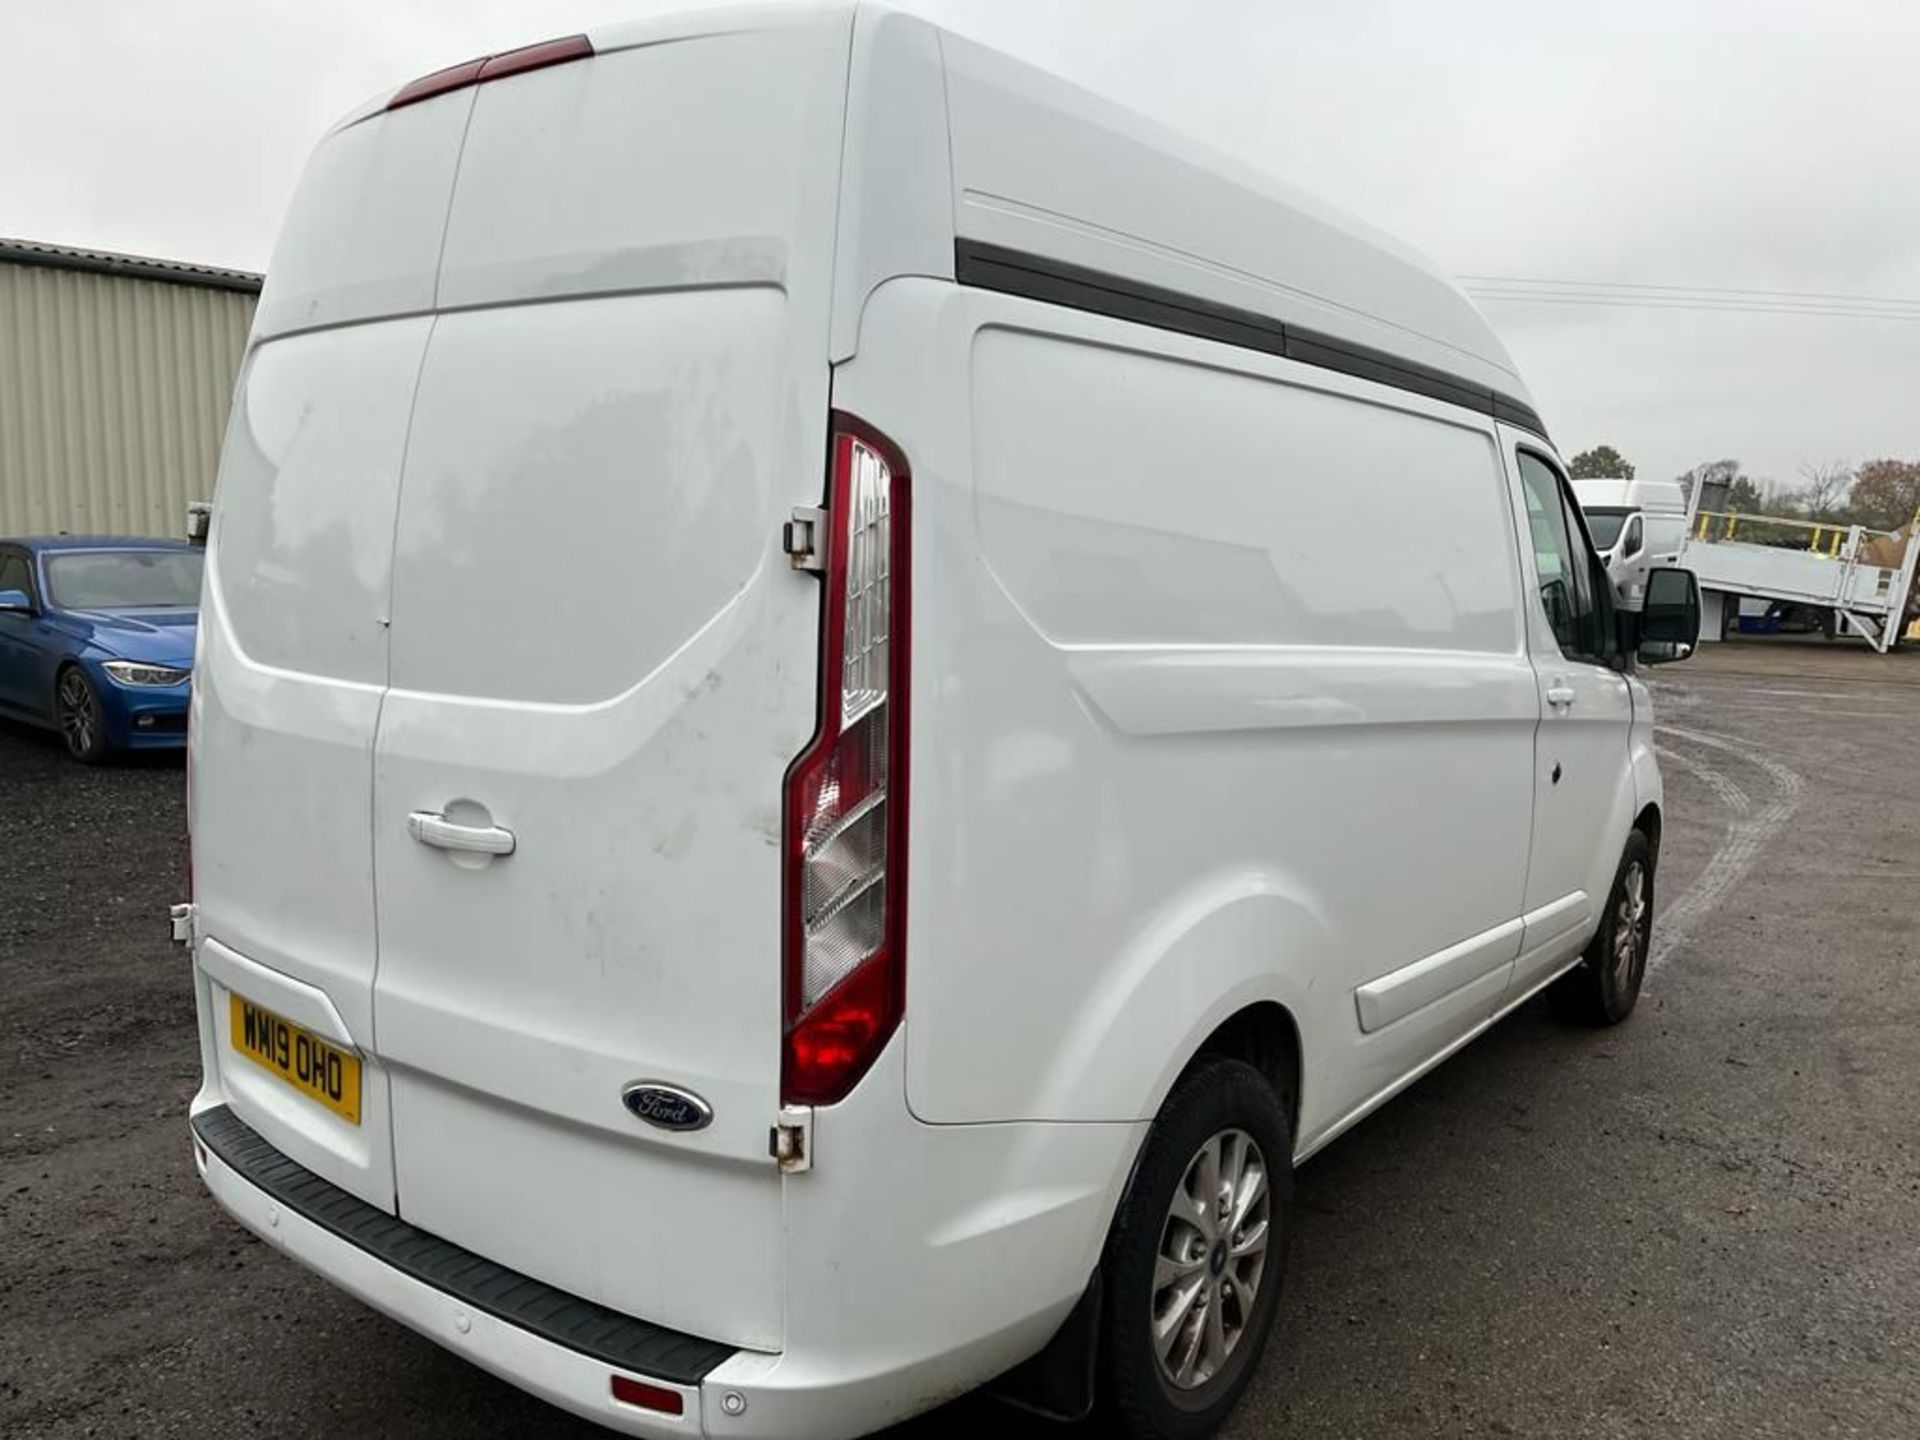 2019 19 ford Transit custom limited high roof - 87k miles - air con - alloy wheels - ply lined - Image 6 of 9